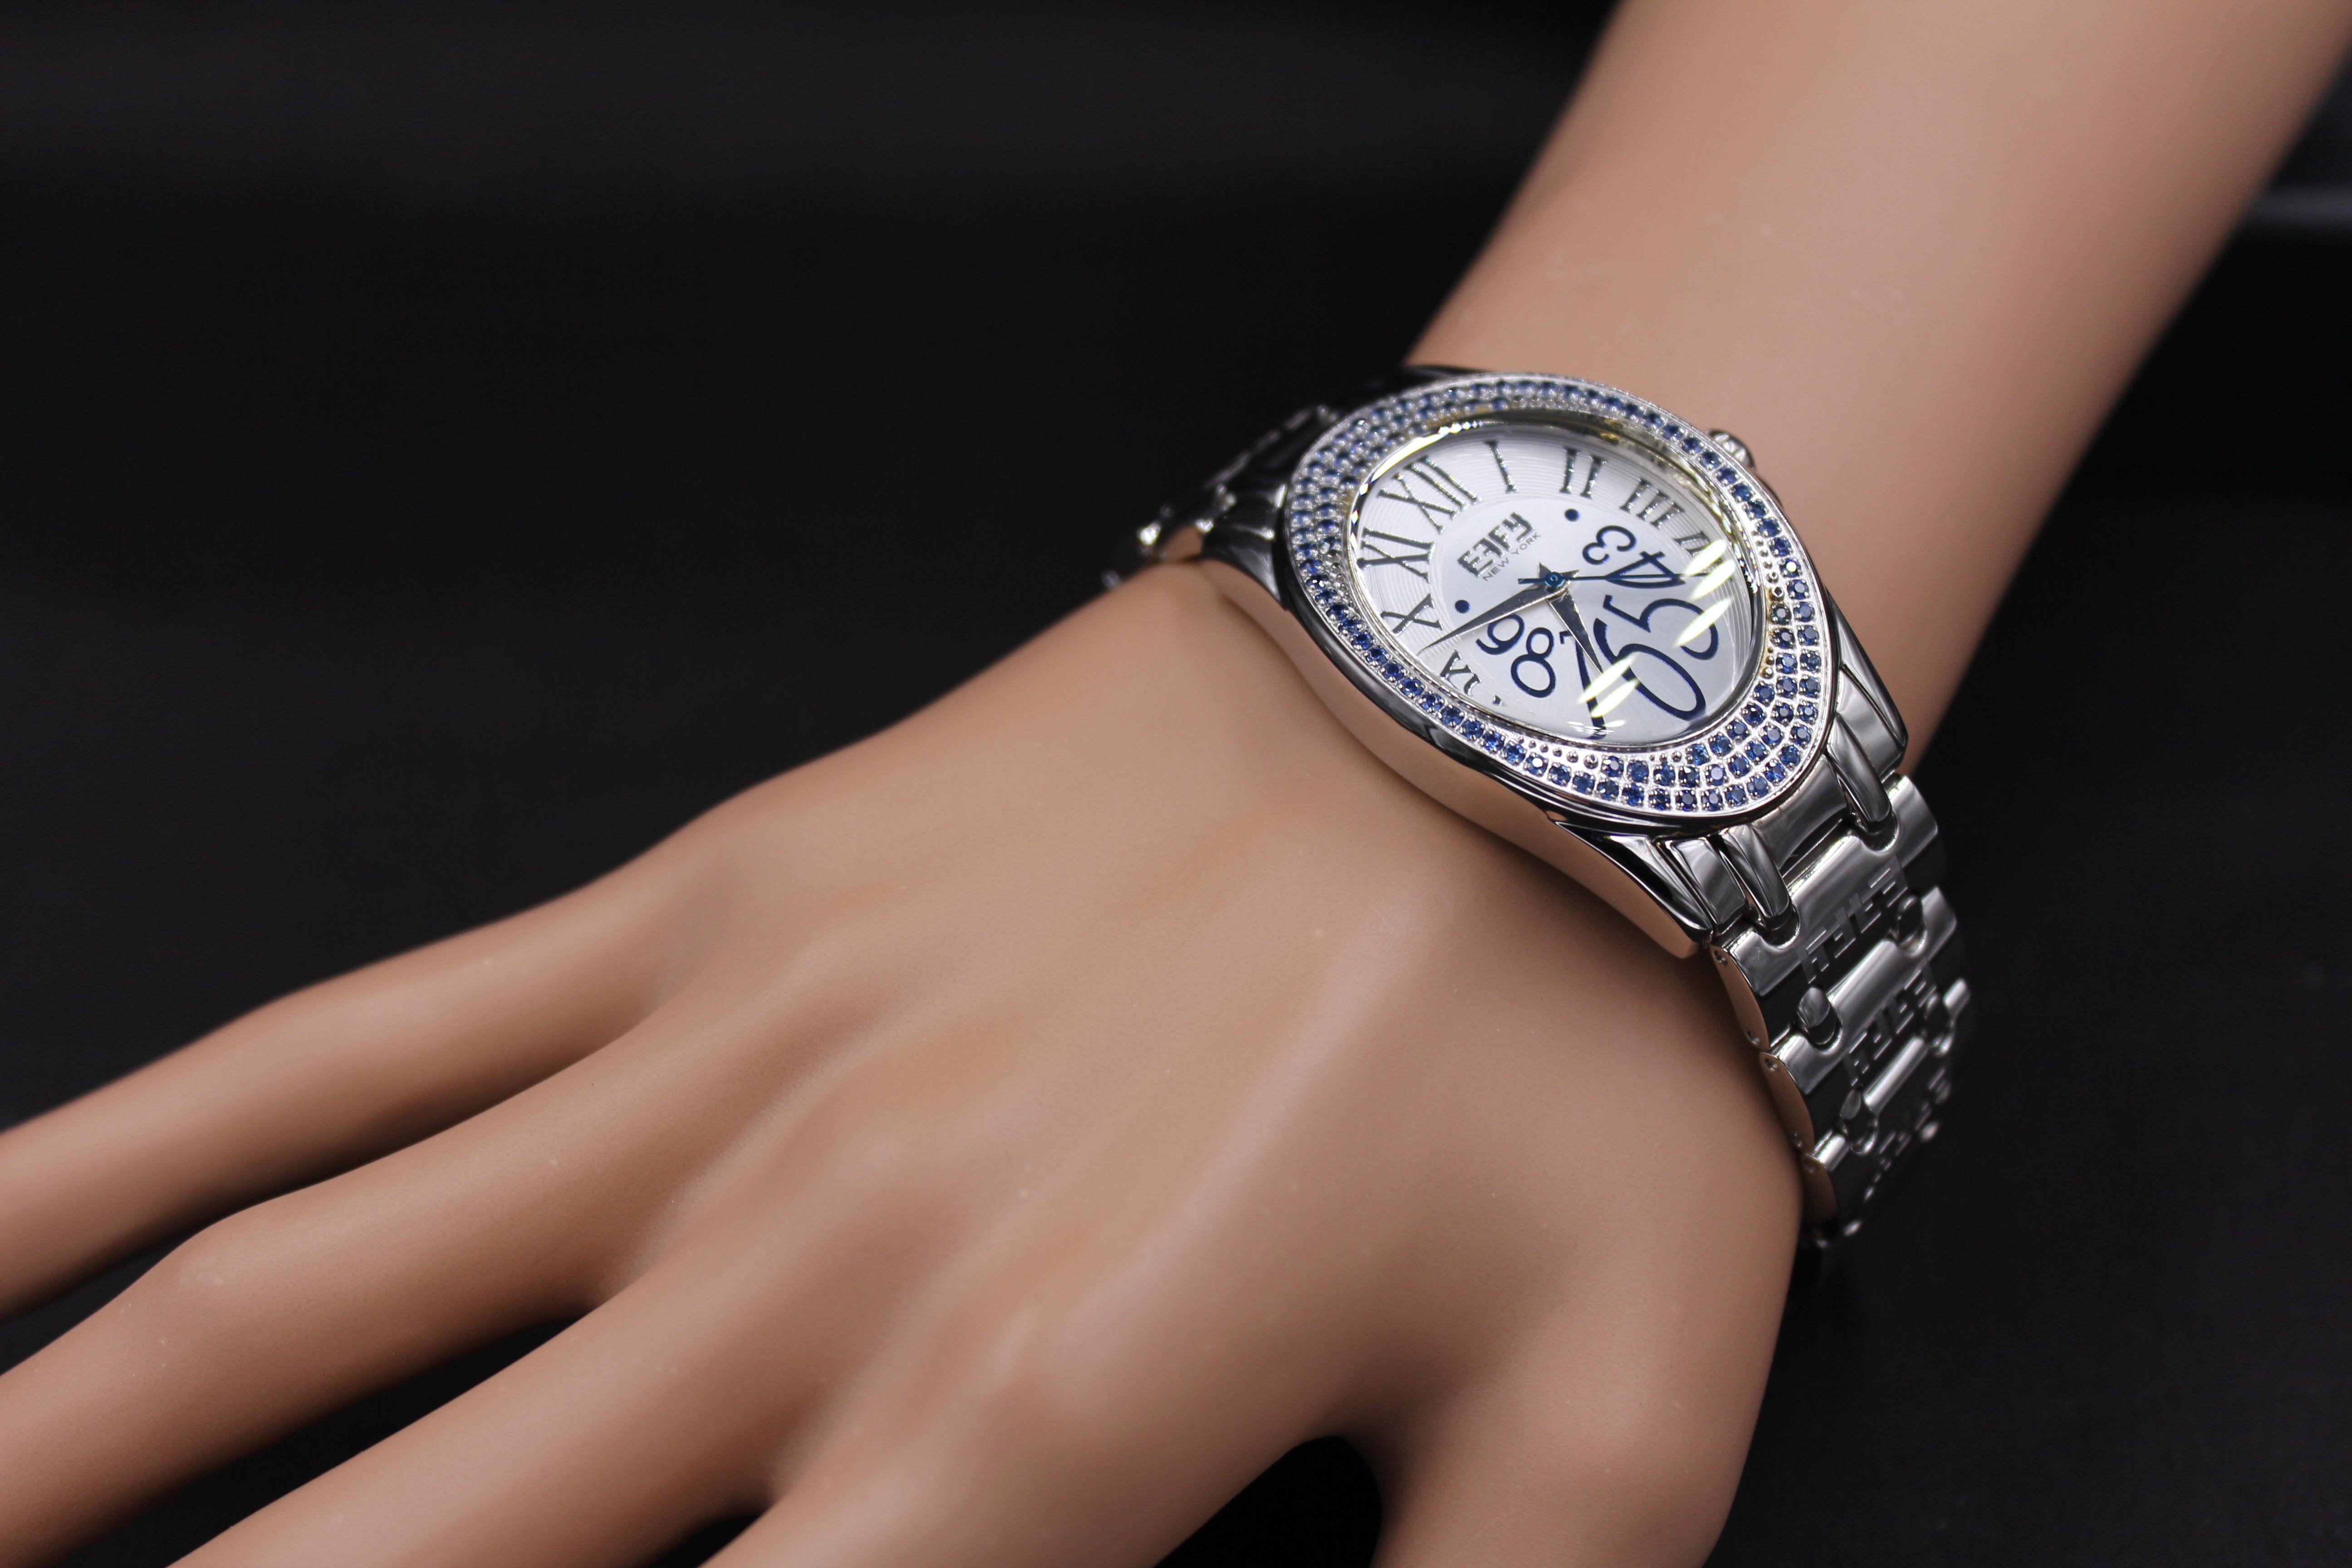 · ·         Quality Swiss-Quartz movement guarantees precision timing
·         Mother-of-Pearl dial micro-paved with diamonds and gemstones enhances any dress style
·         Scratch-resistant sapphire glass lens
·         Stainless steel bracelet